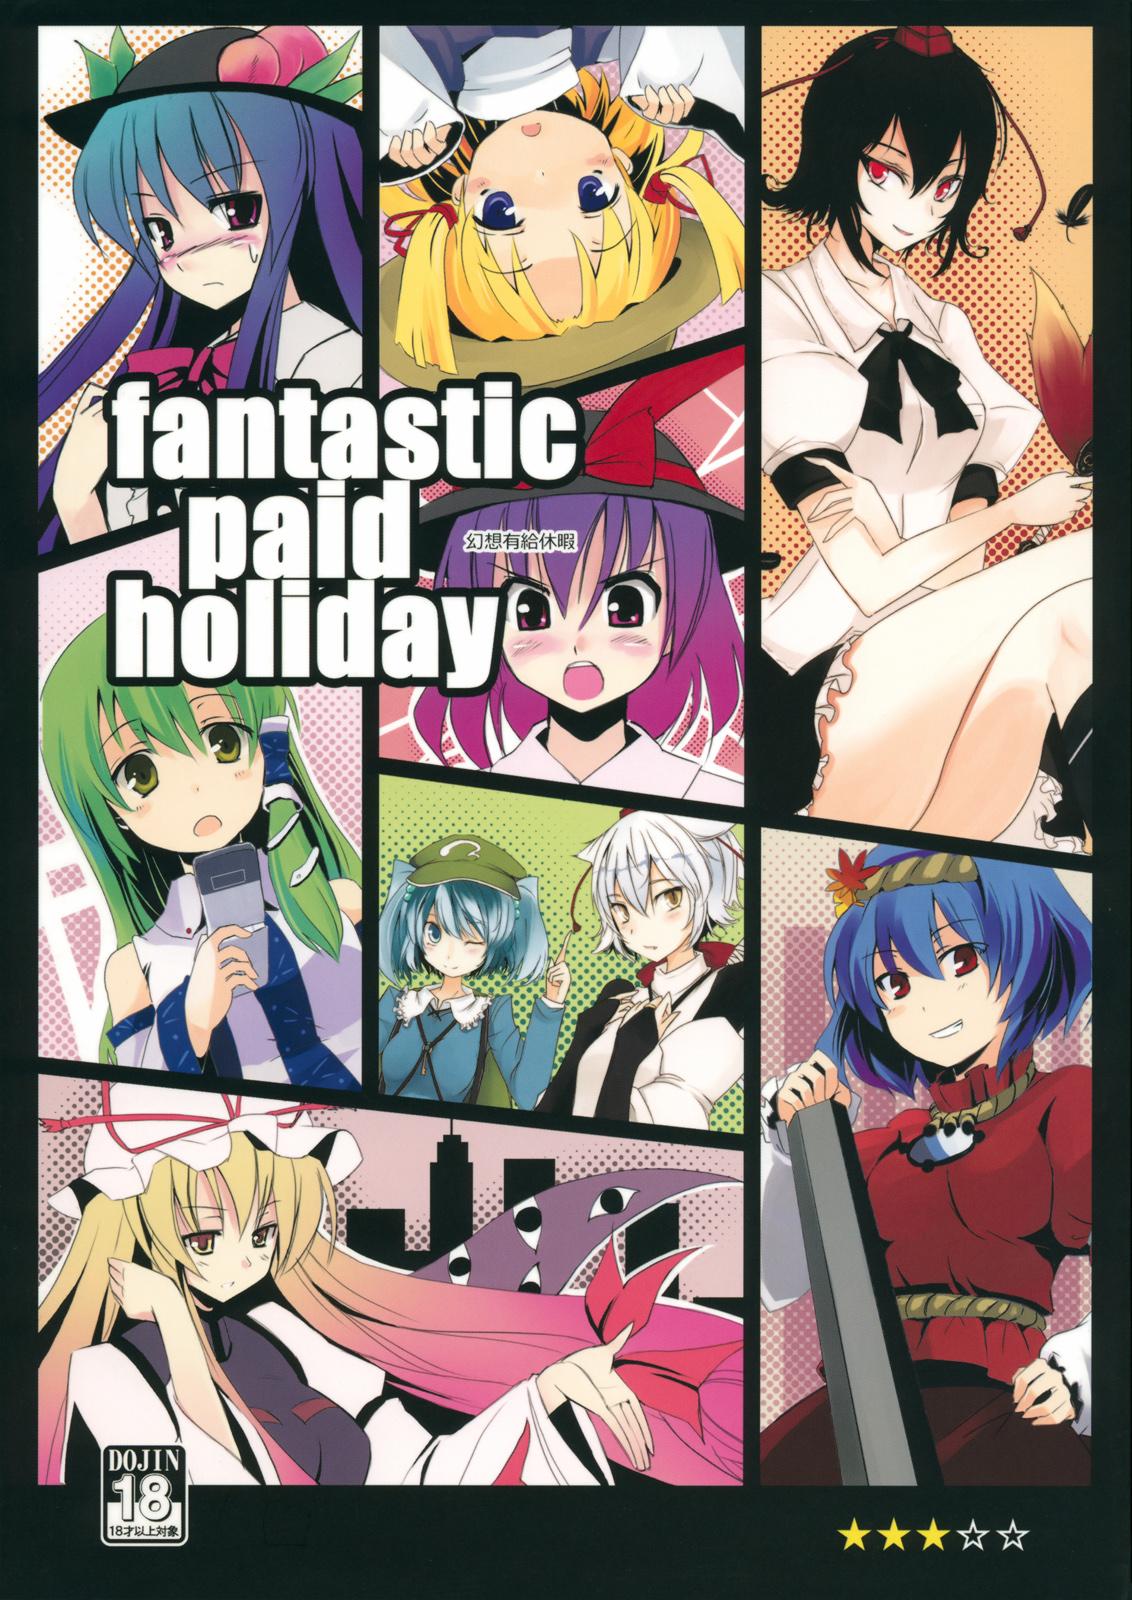 Sexy Girl Sex Gensou Yuukyuukyuuka - fantastic paid holiday - Touhou project Free Amatuer Porn - Picture 1